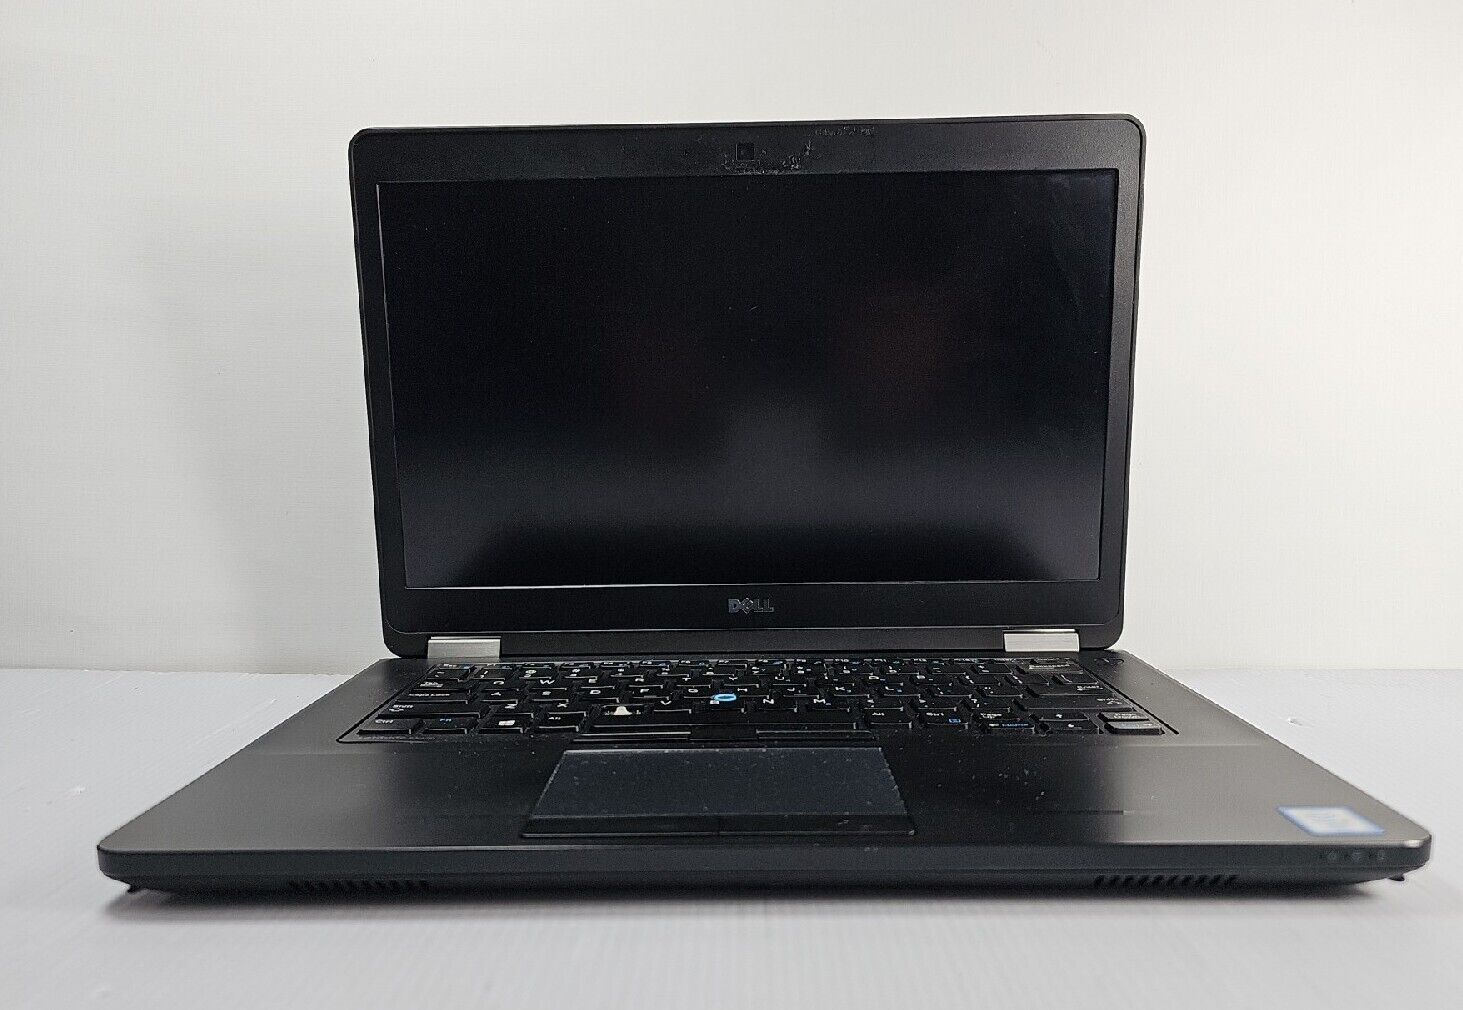 DELL latitude Business Laptop Intel I5 AS IS NO HDD/BATTERY/RAM